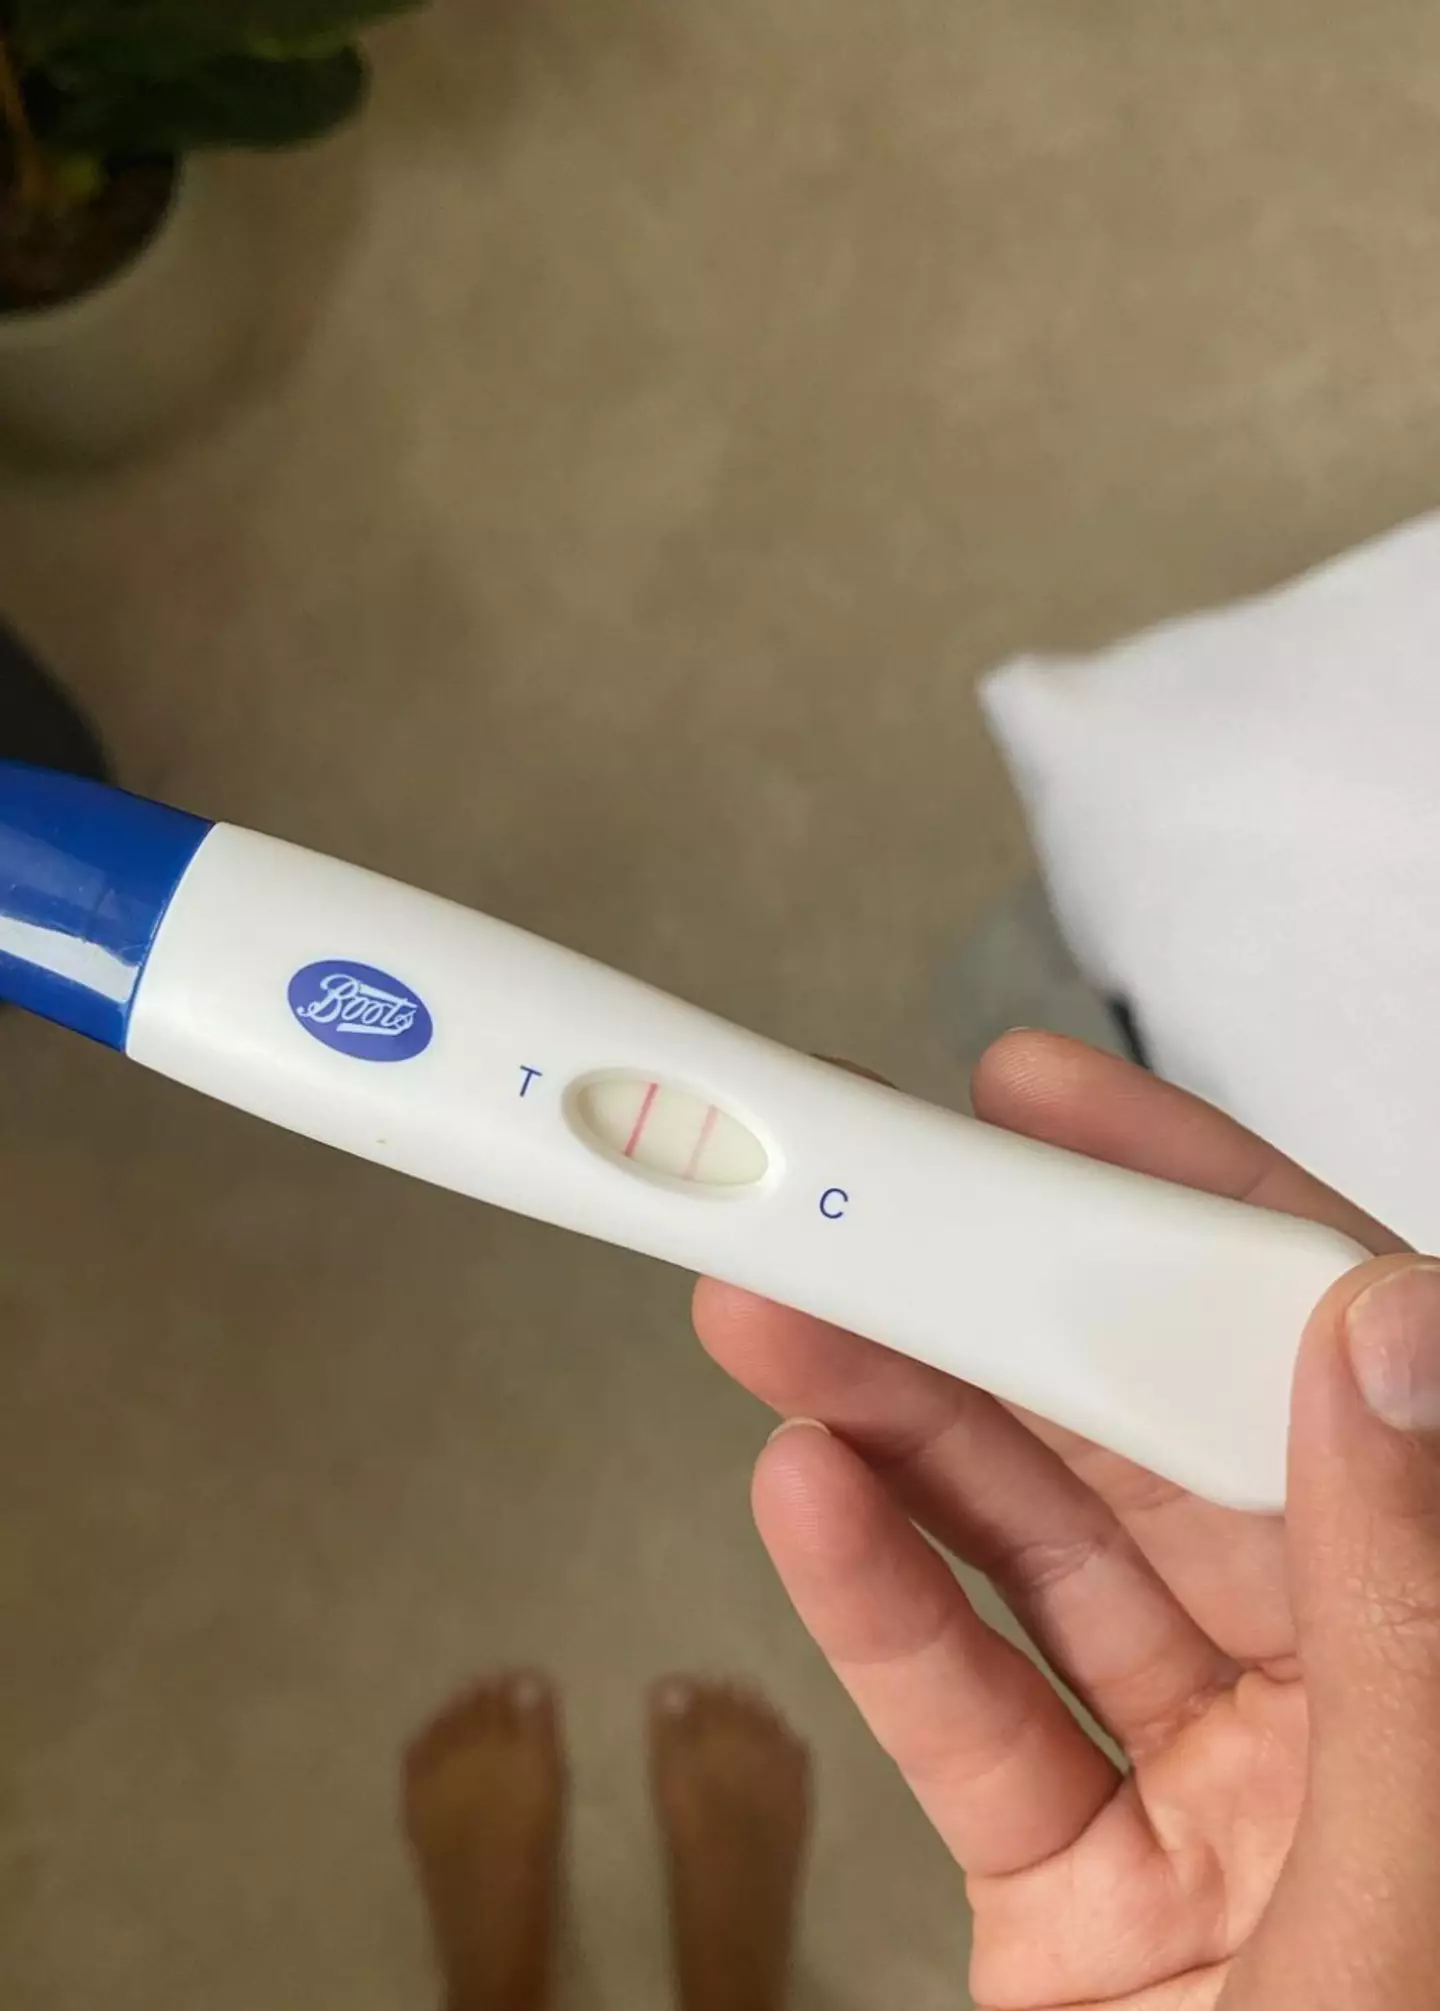 One picture showed a positive pregnancy test. (